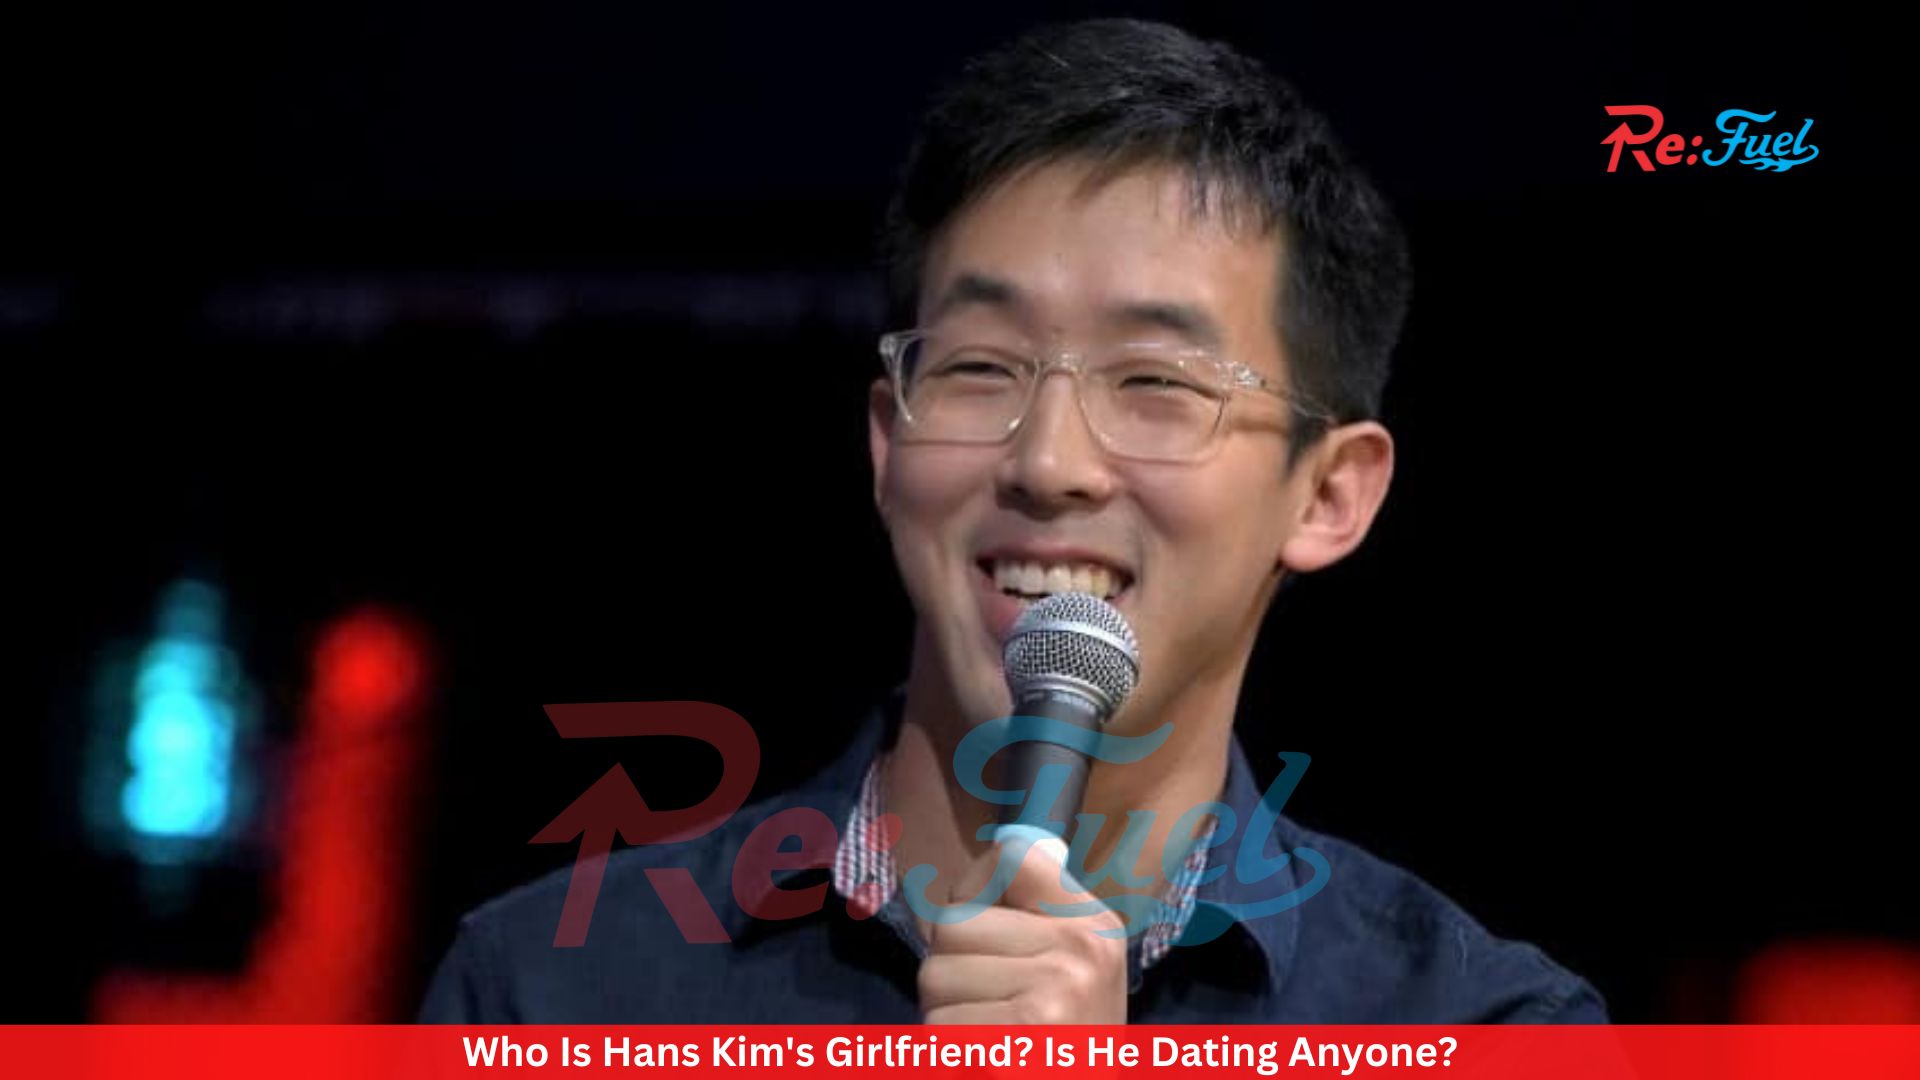 Who Is Hans Kim's Girlfriend? Is He Dating Anyone?